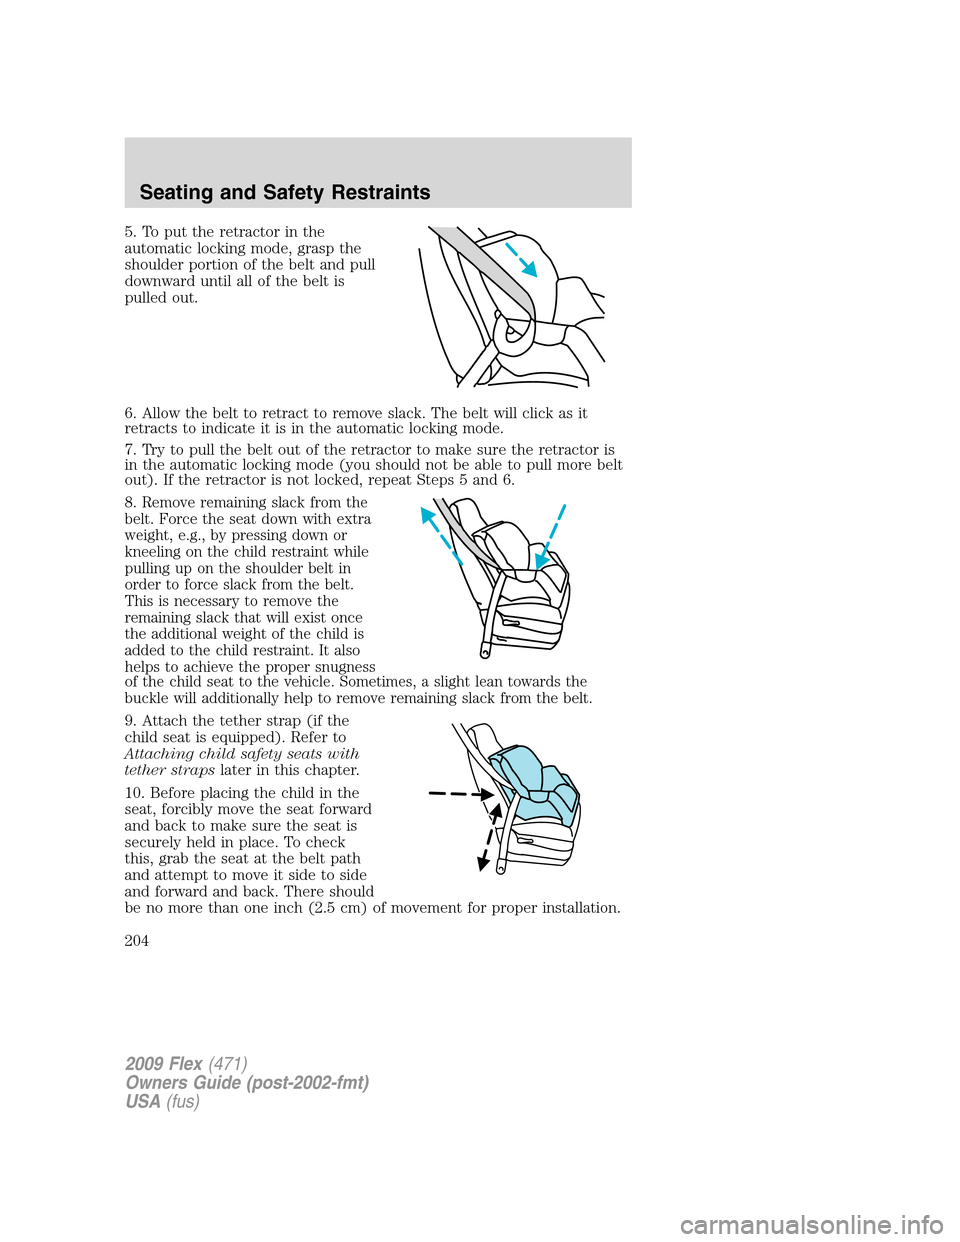 FORD FLEX 2009 1.G Owners Manual 5. To put the retractor in the
automatic locking mode, grasp the
shoulder portion of the belt and pull
downward until all of the belt is
pulled out.
6. Allow the belt to retract to remove slack. The b